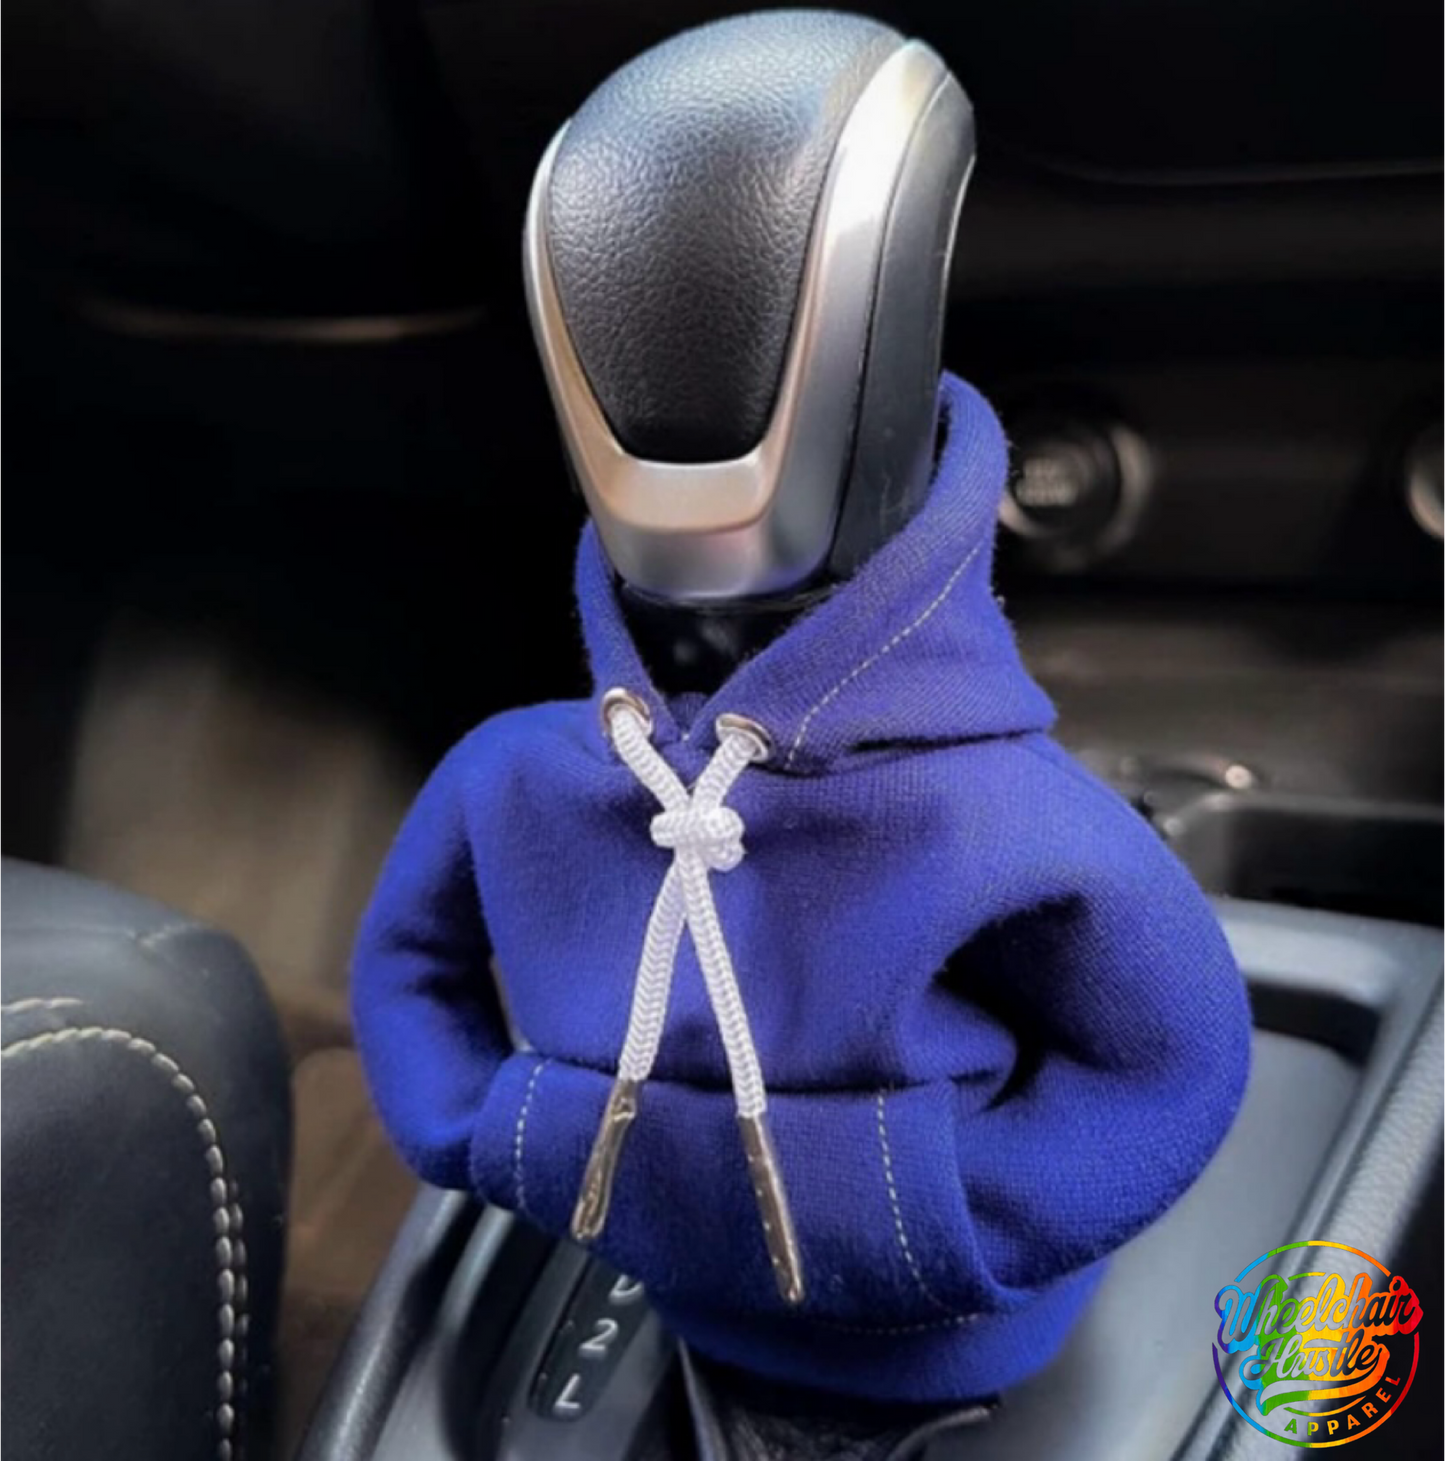 Gear Shift Hoodie Cover Shift Cover